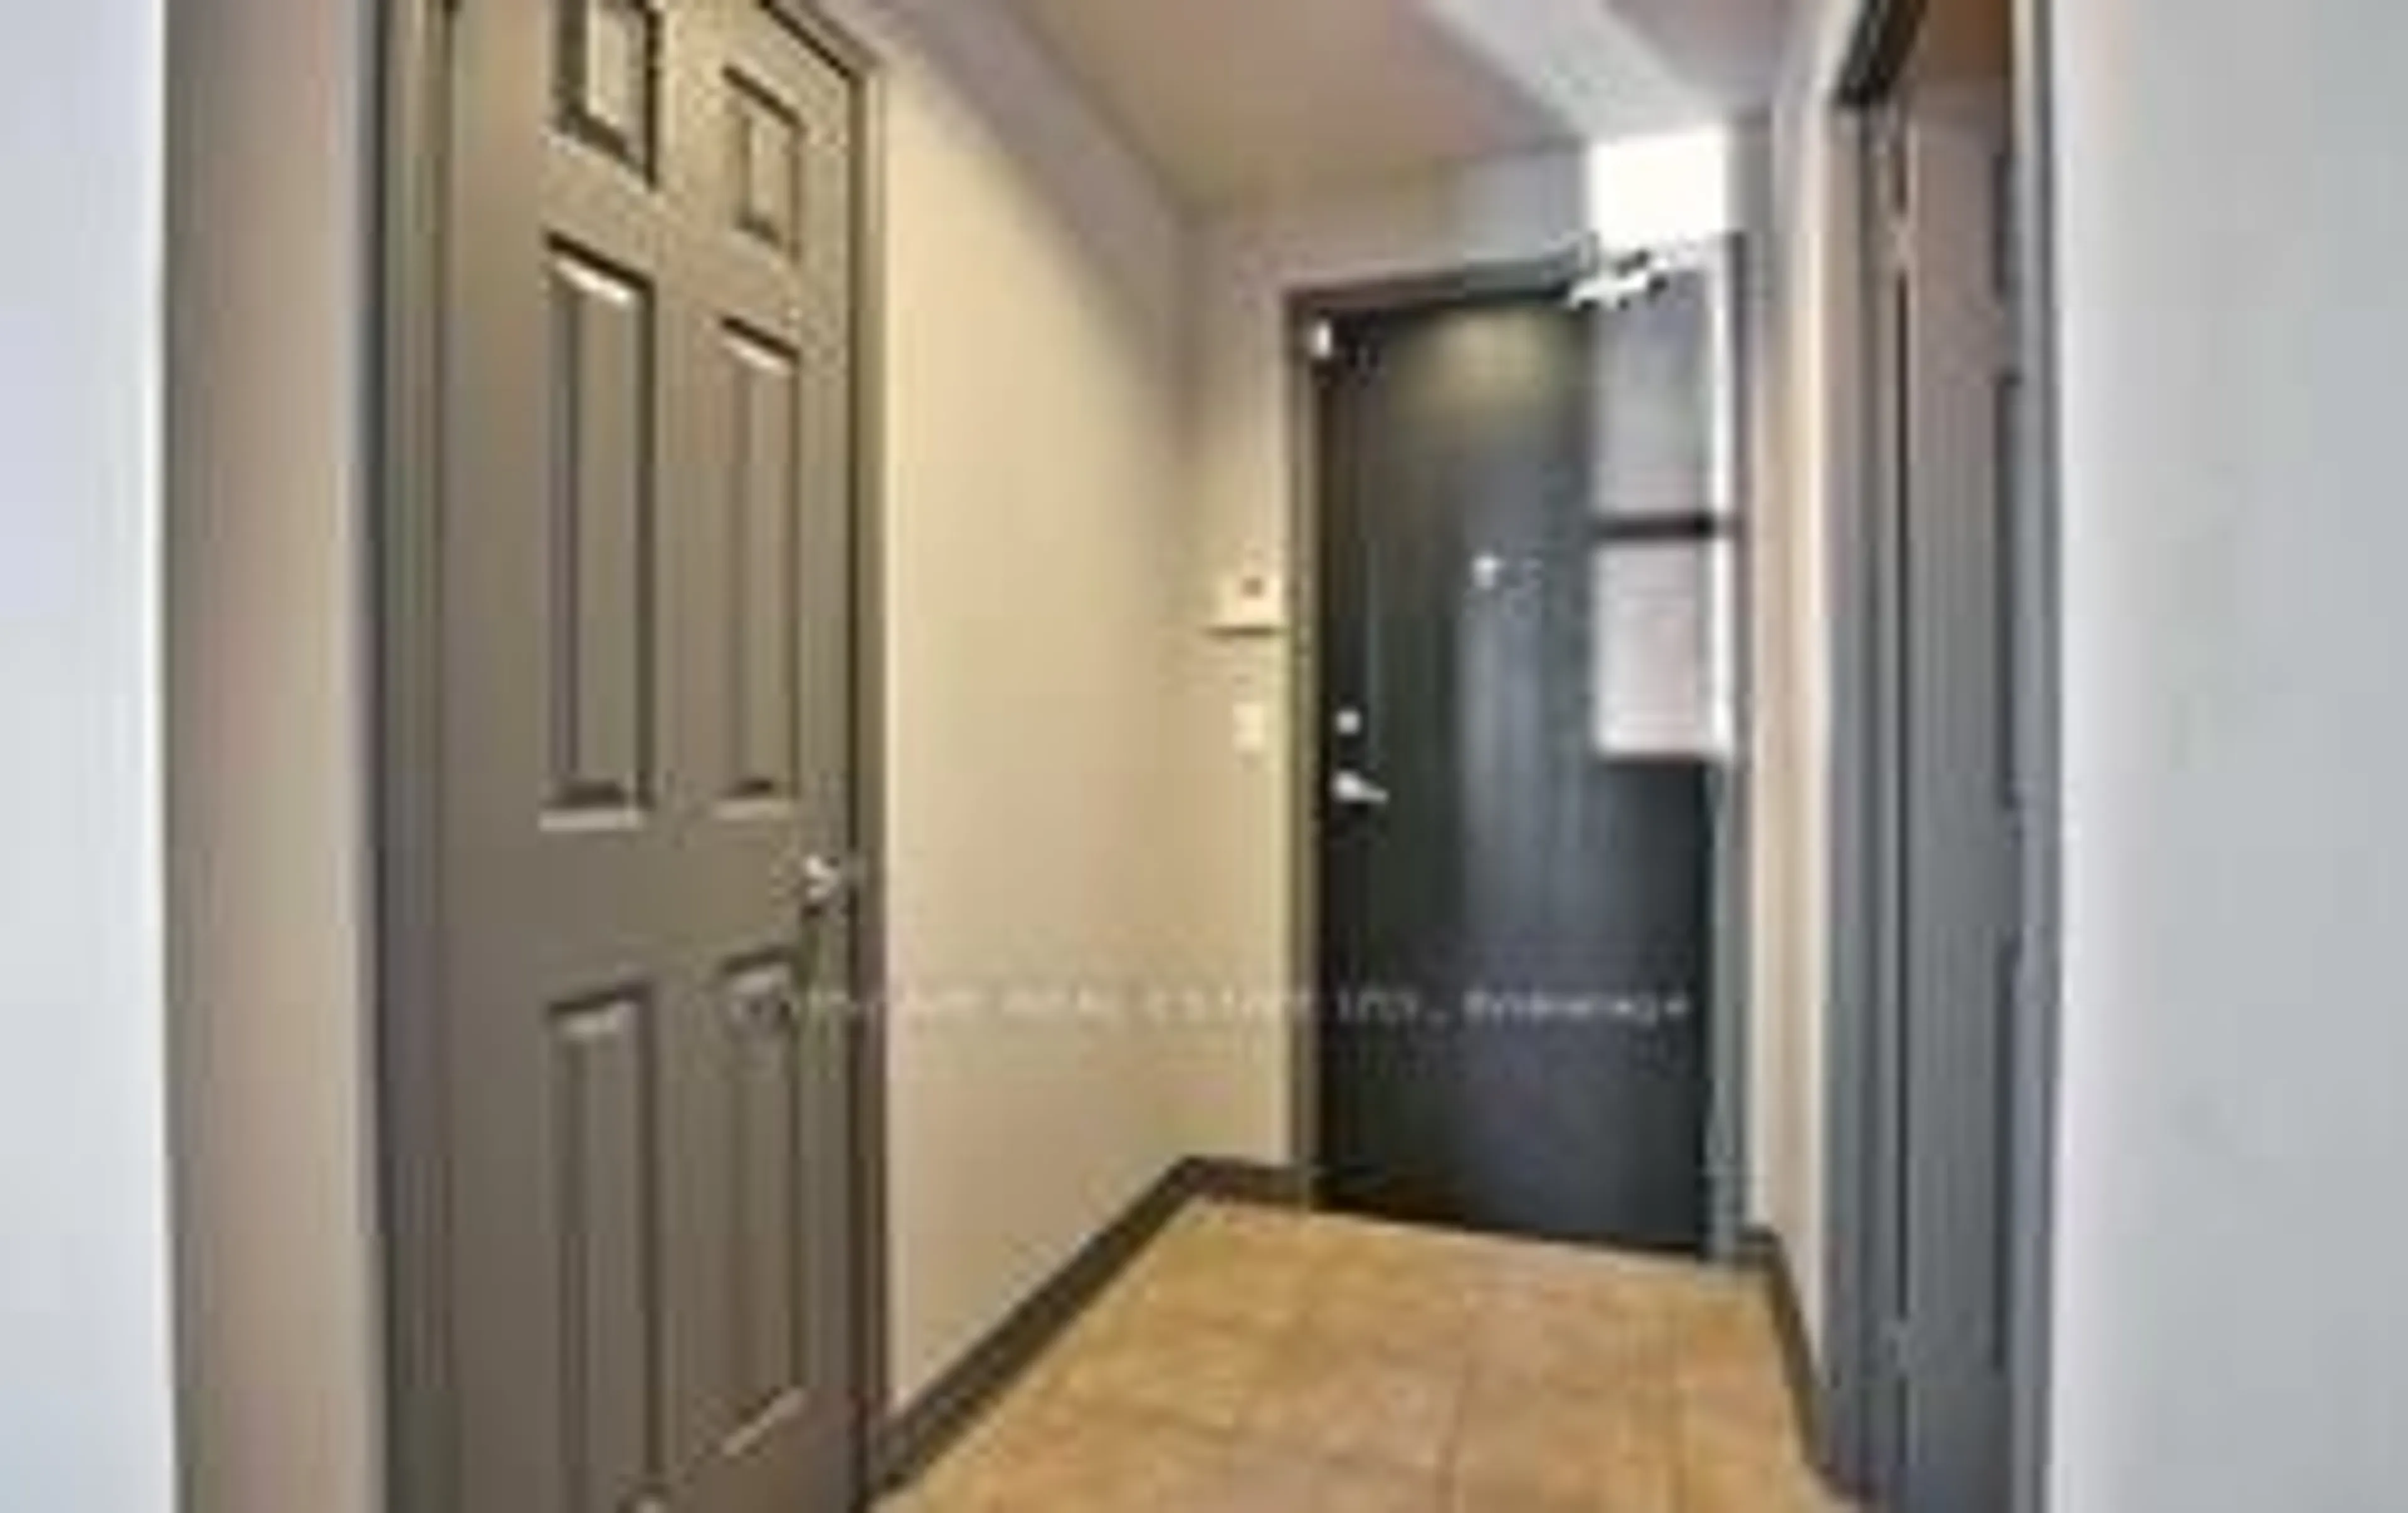 Indoor foyer for 388 Prince of wales Dr #3307, Mississauga Ontario L5B 0A1